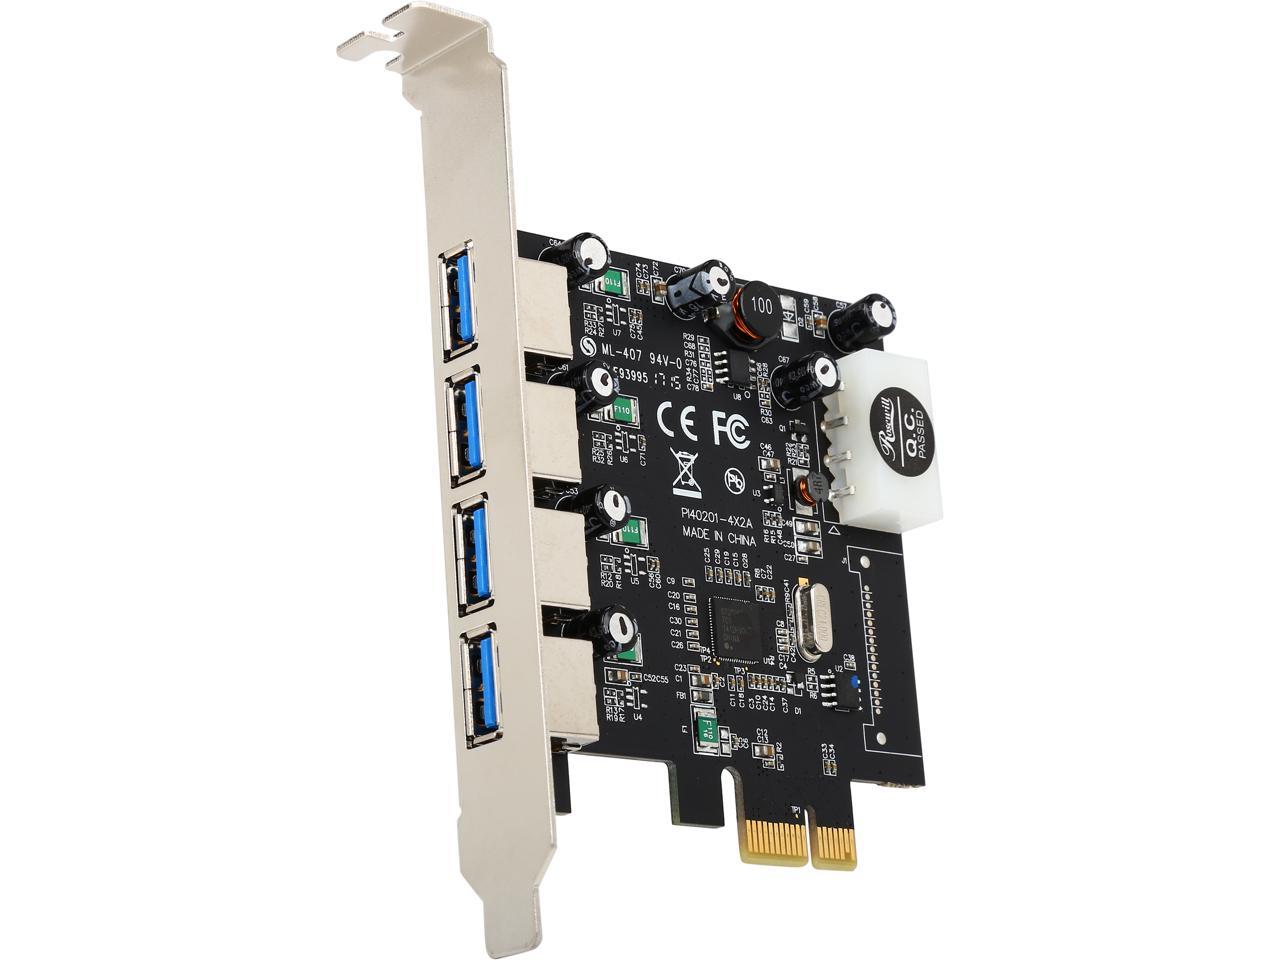 Rosewill Rc 508 Usb 3 0 Pci E Express Card With 4 Usb 3 0 Ports